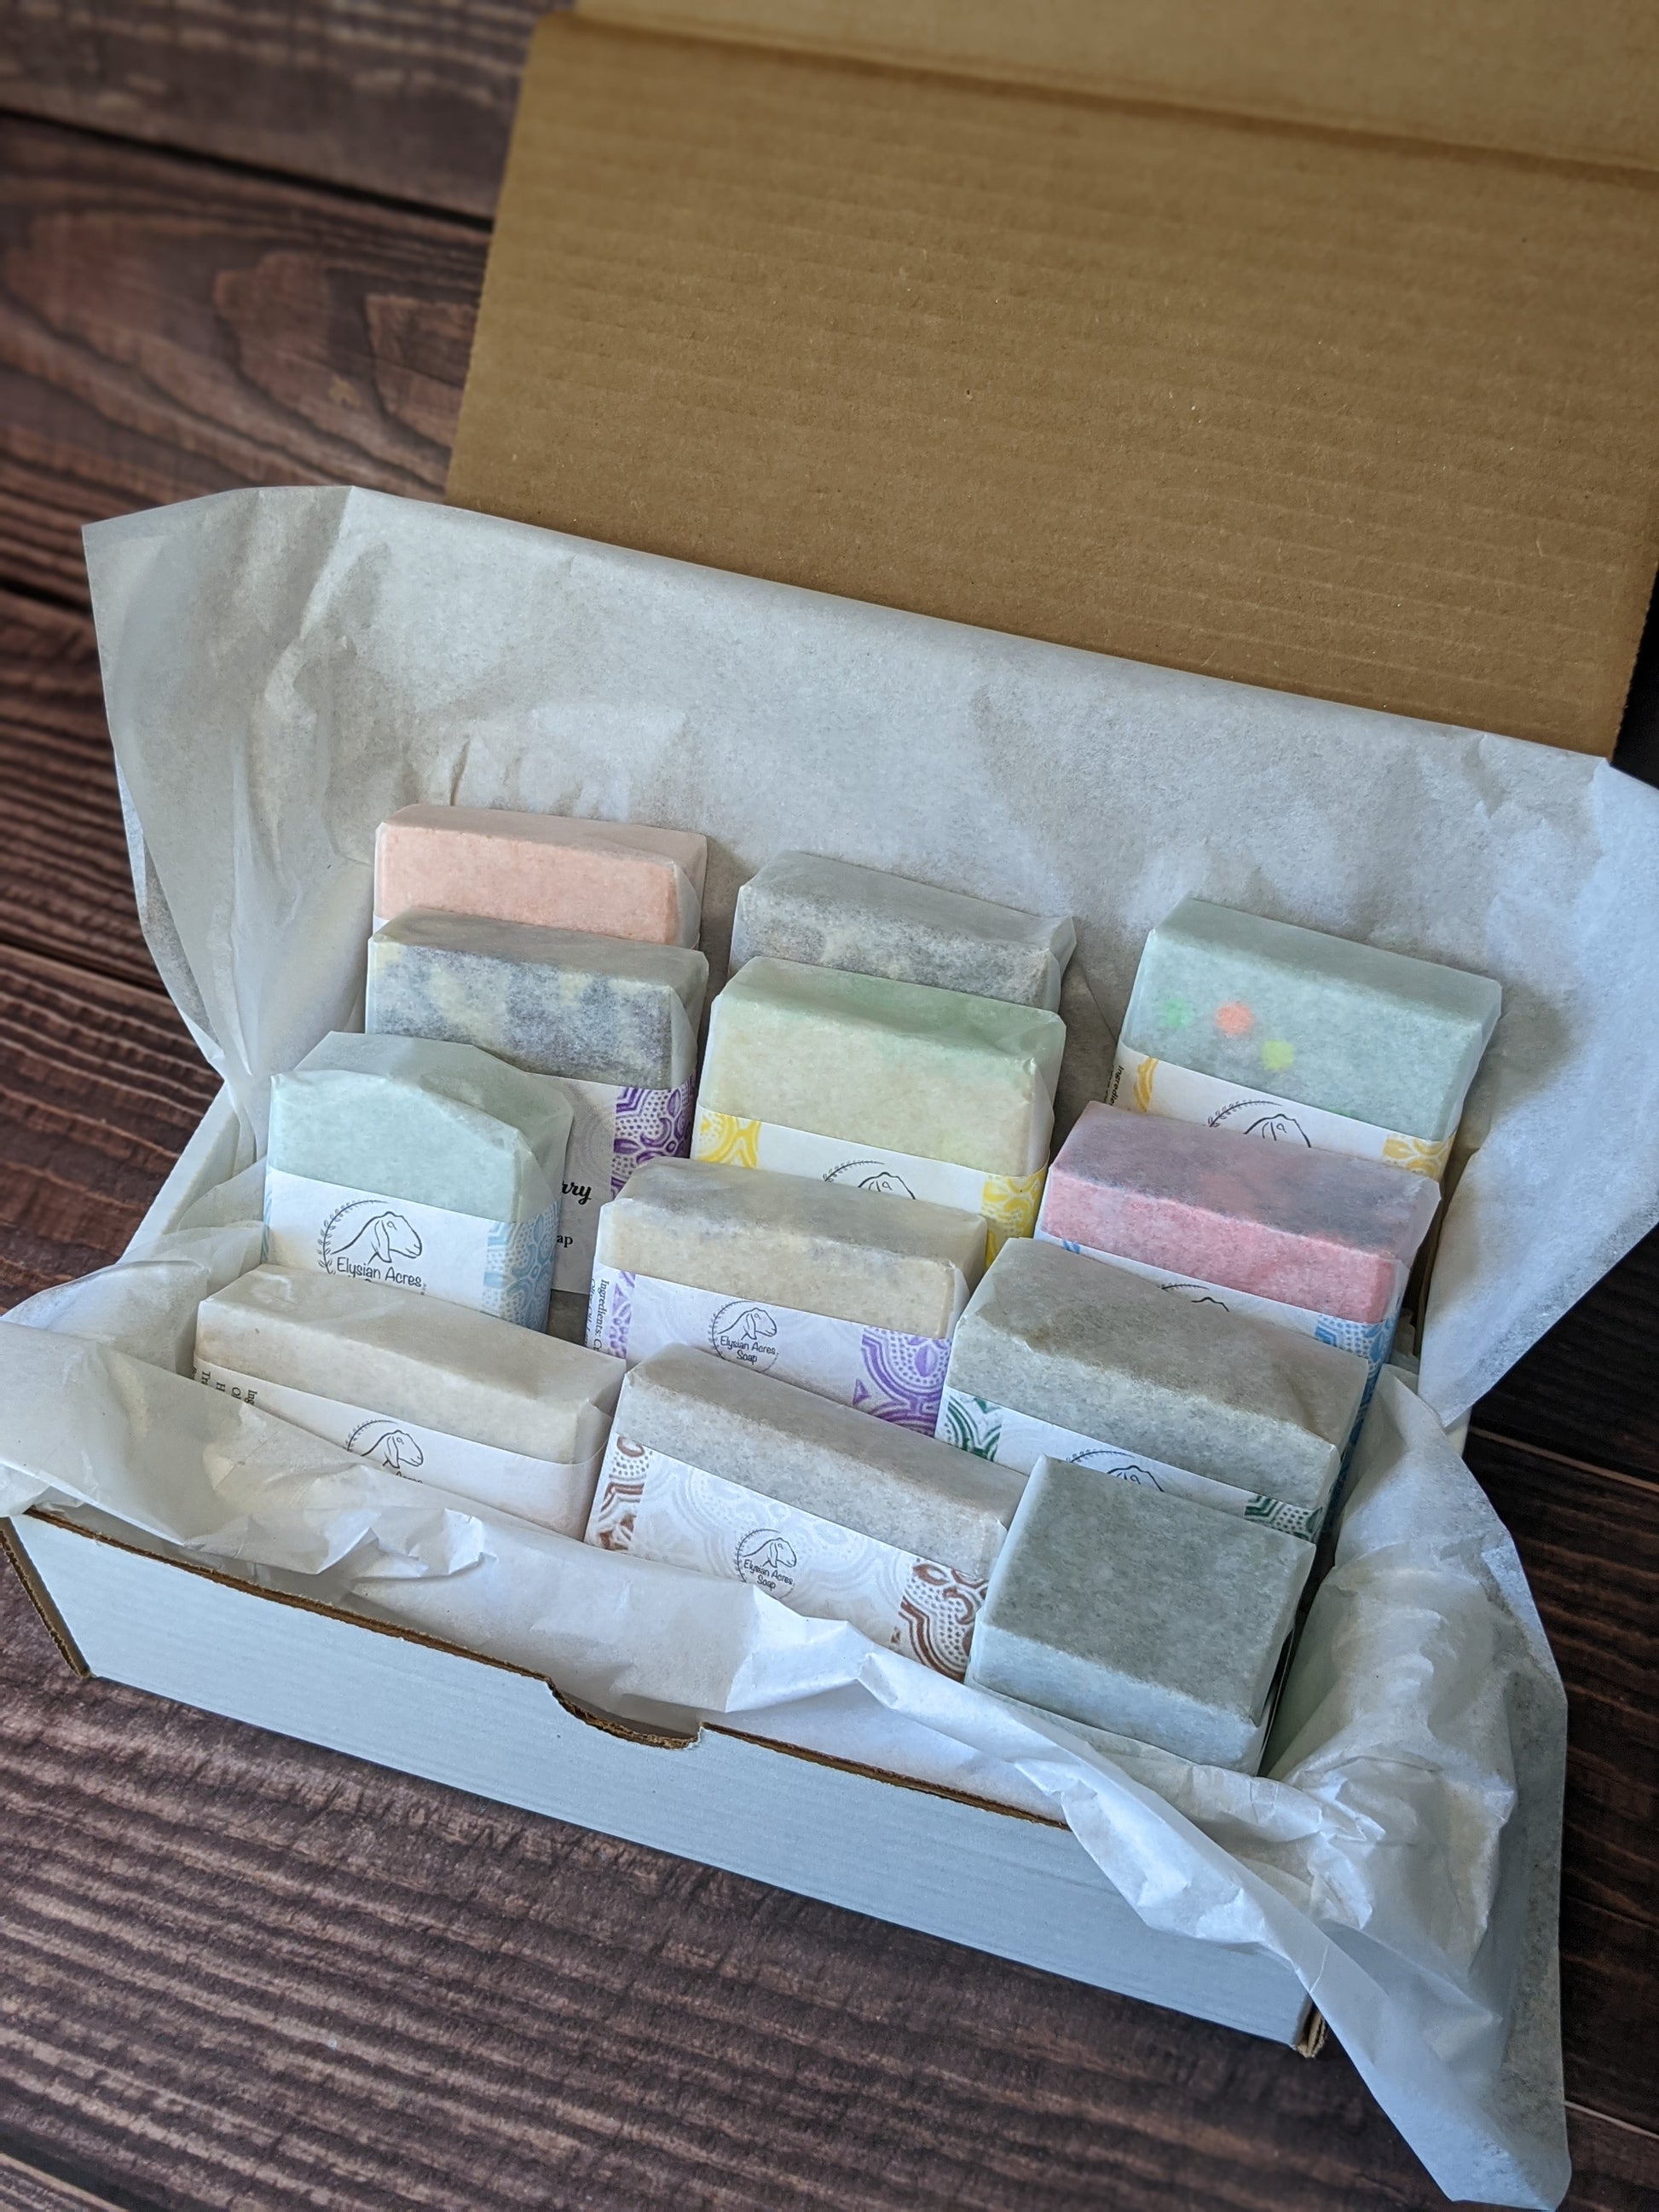 12 Shea Butter 3.25 oz Bars, Unboxed